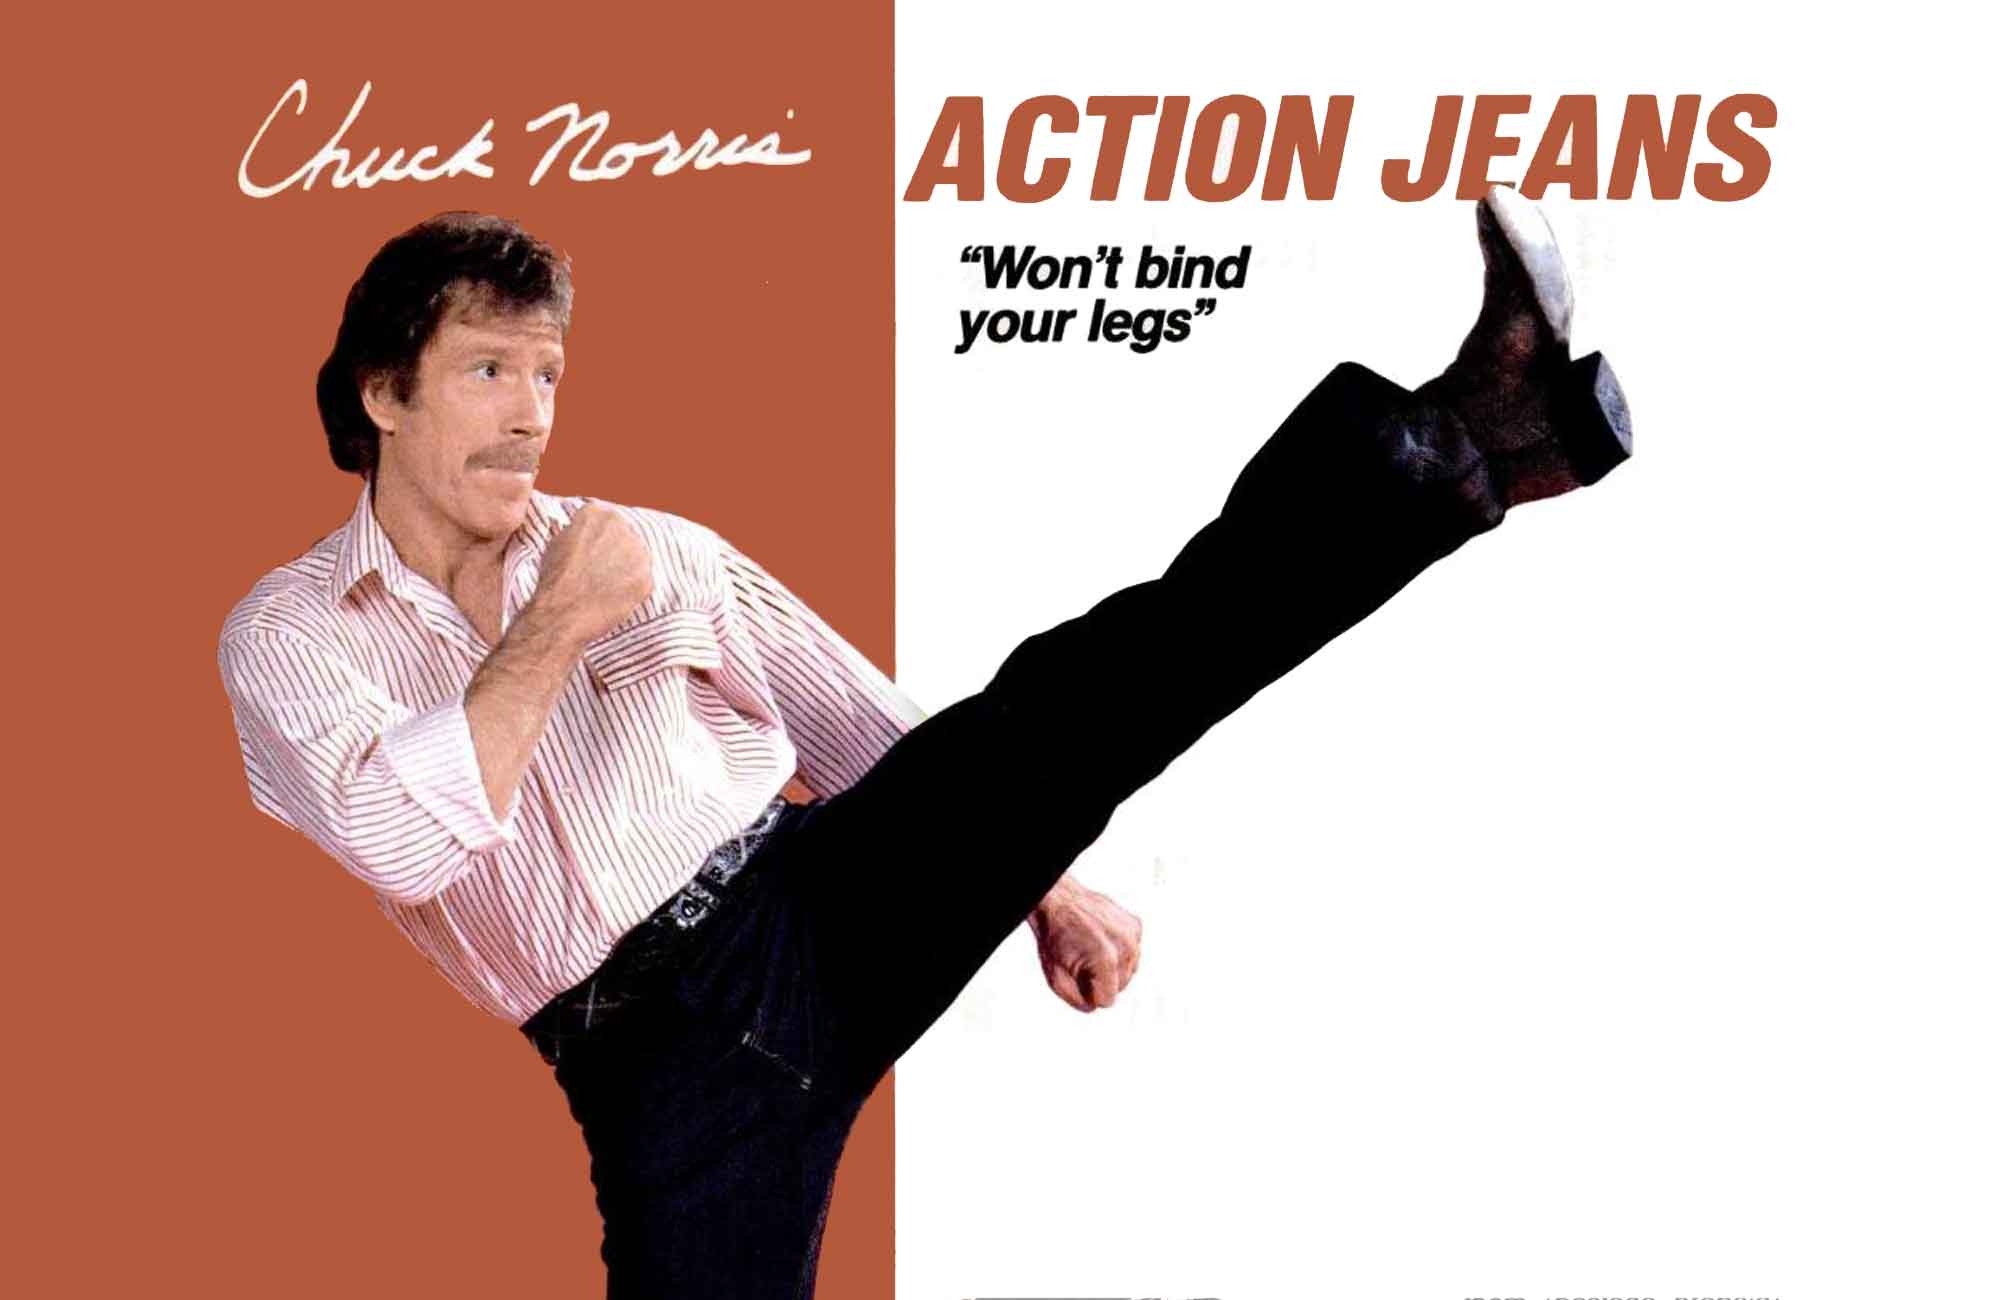 Chuck Norris Action Jeans: How To Kick Butt Without Ripping Your Pants